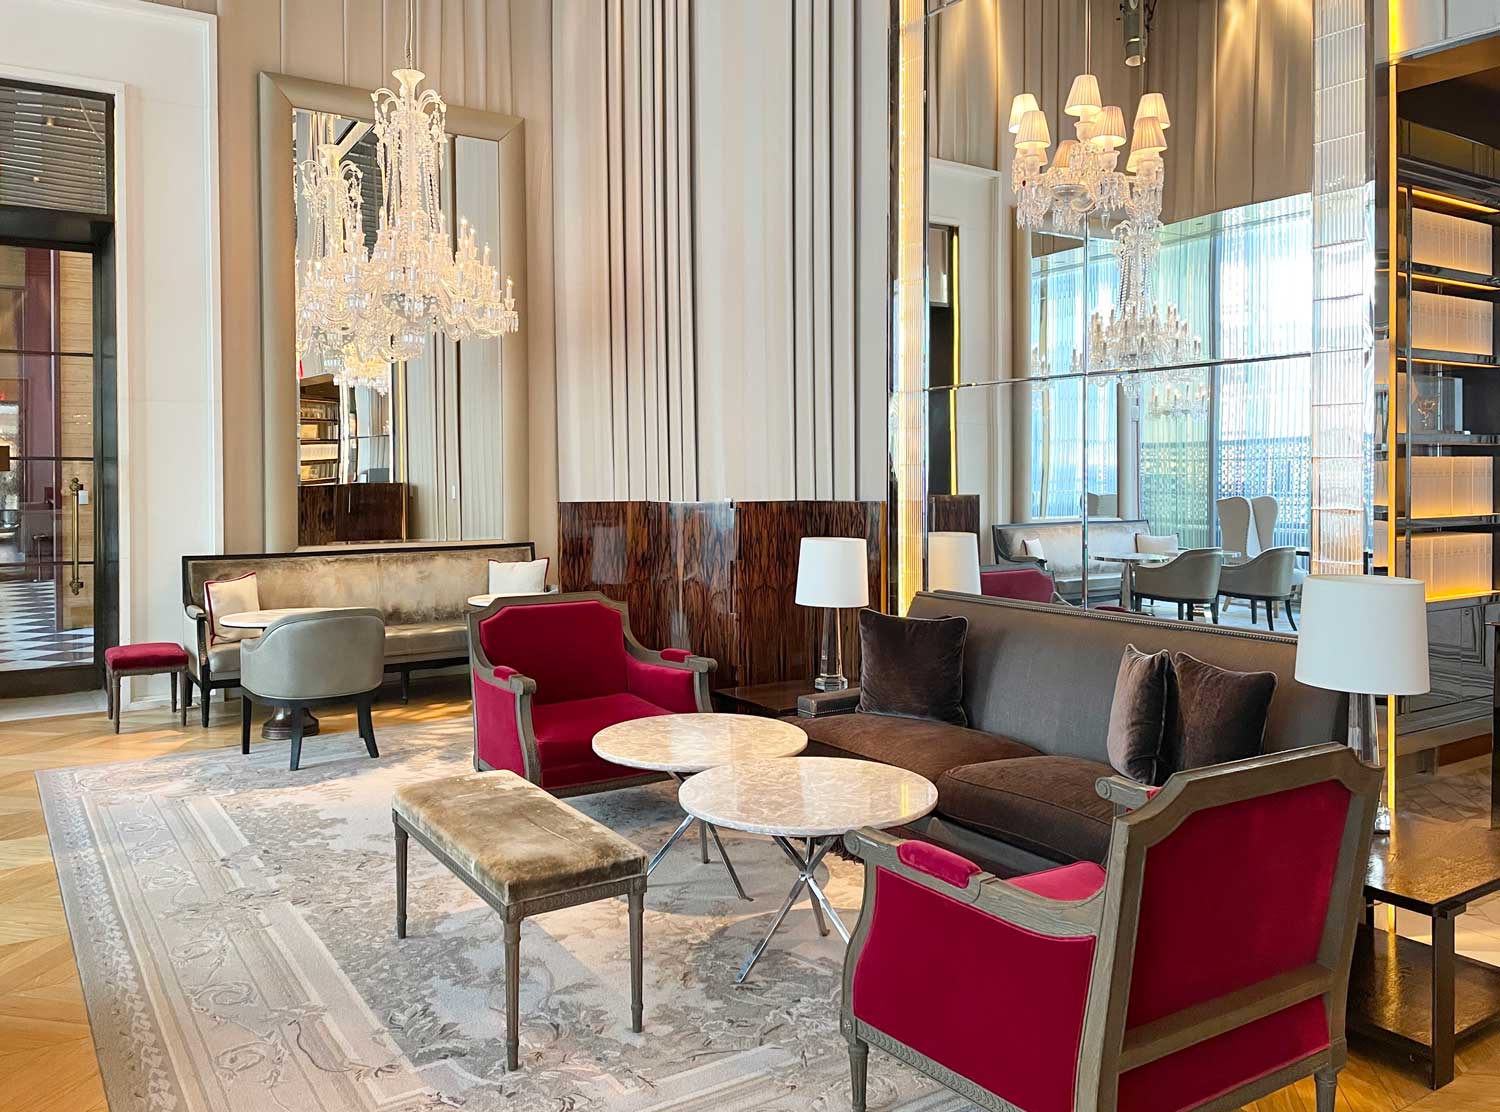 Baccarat Hotel Review - Manhattan | A Hotel Life